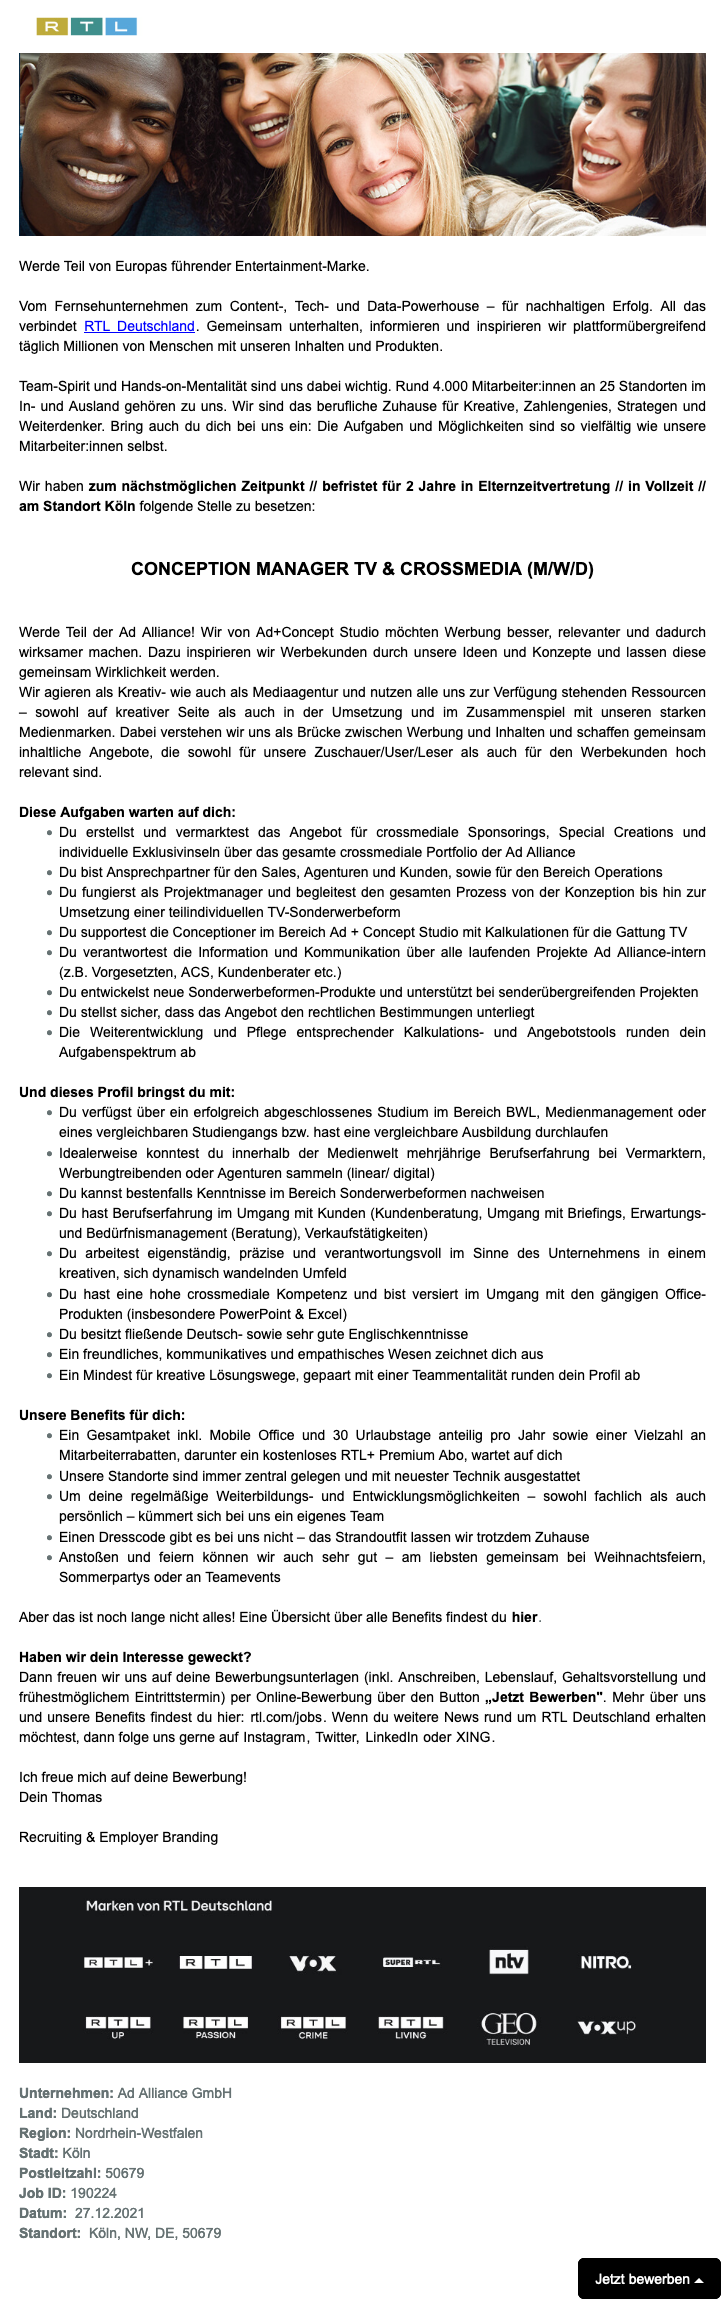 Conception Manager TV & Crossmedia (m/w/d) (Ad Alliance)